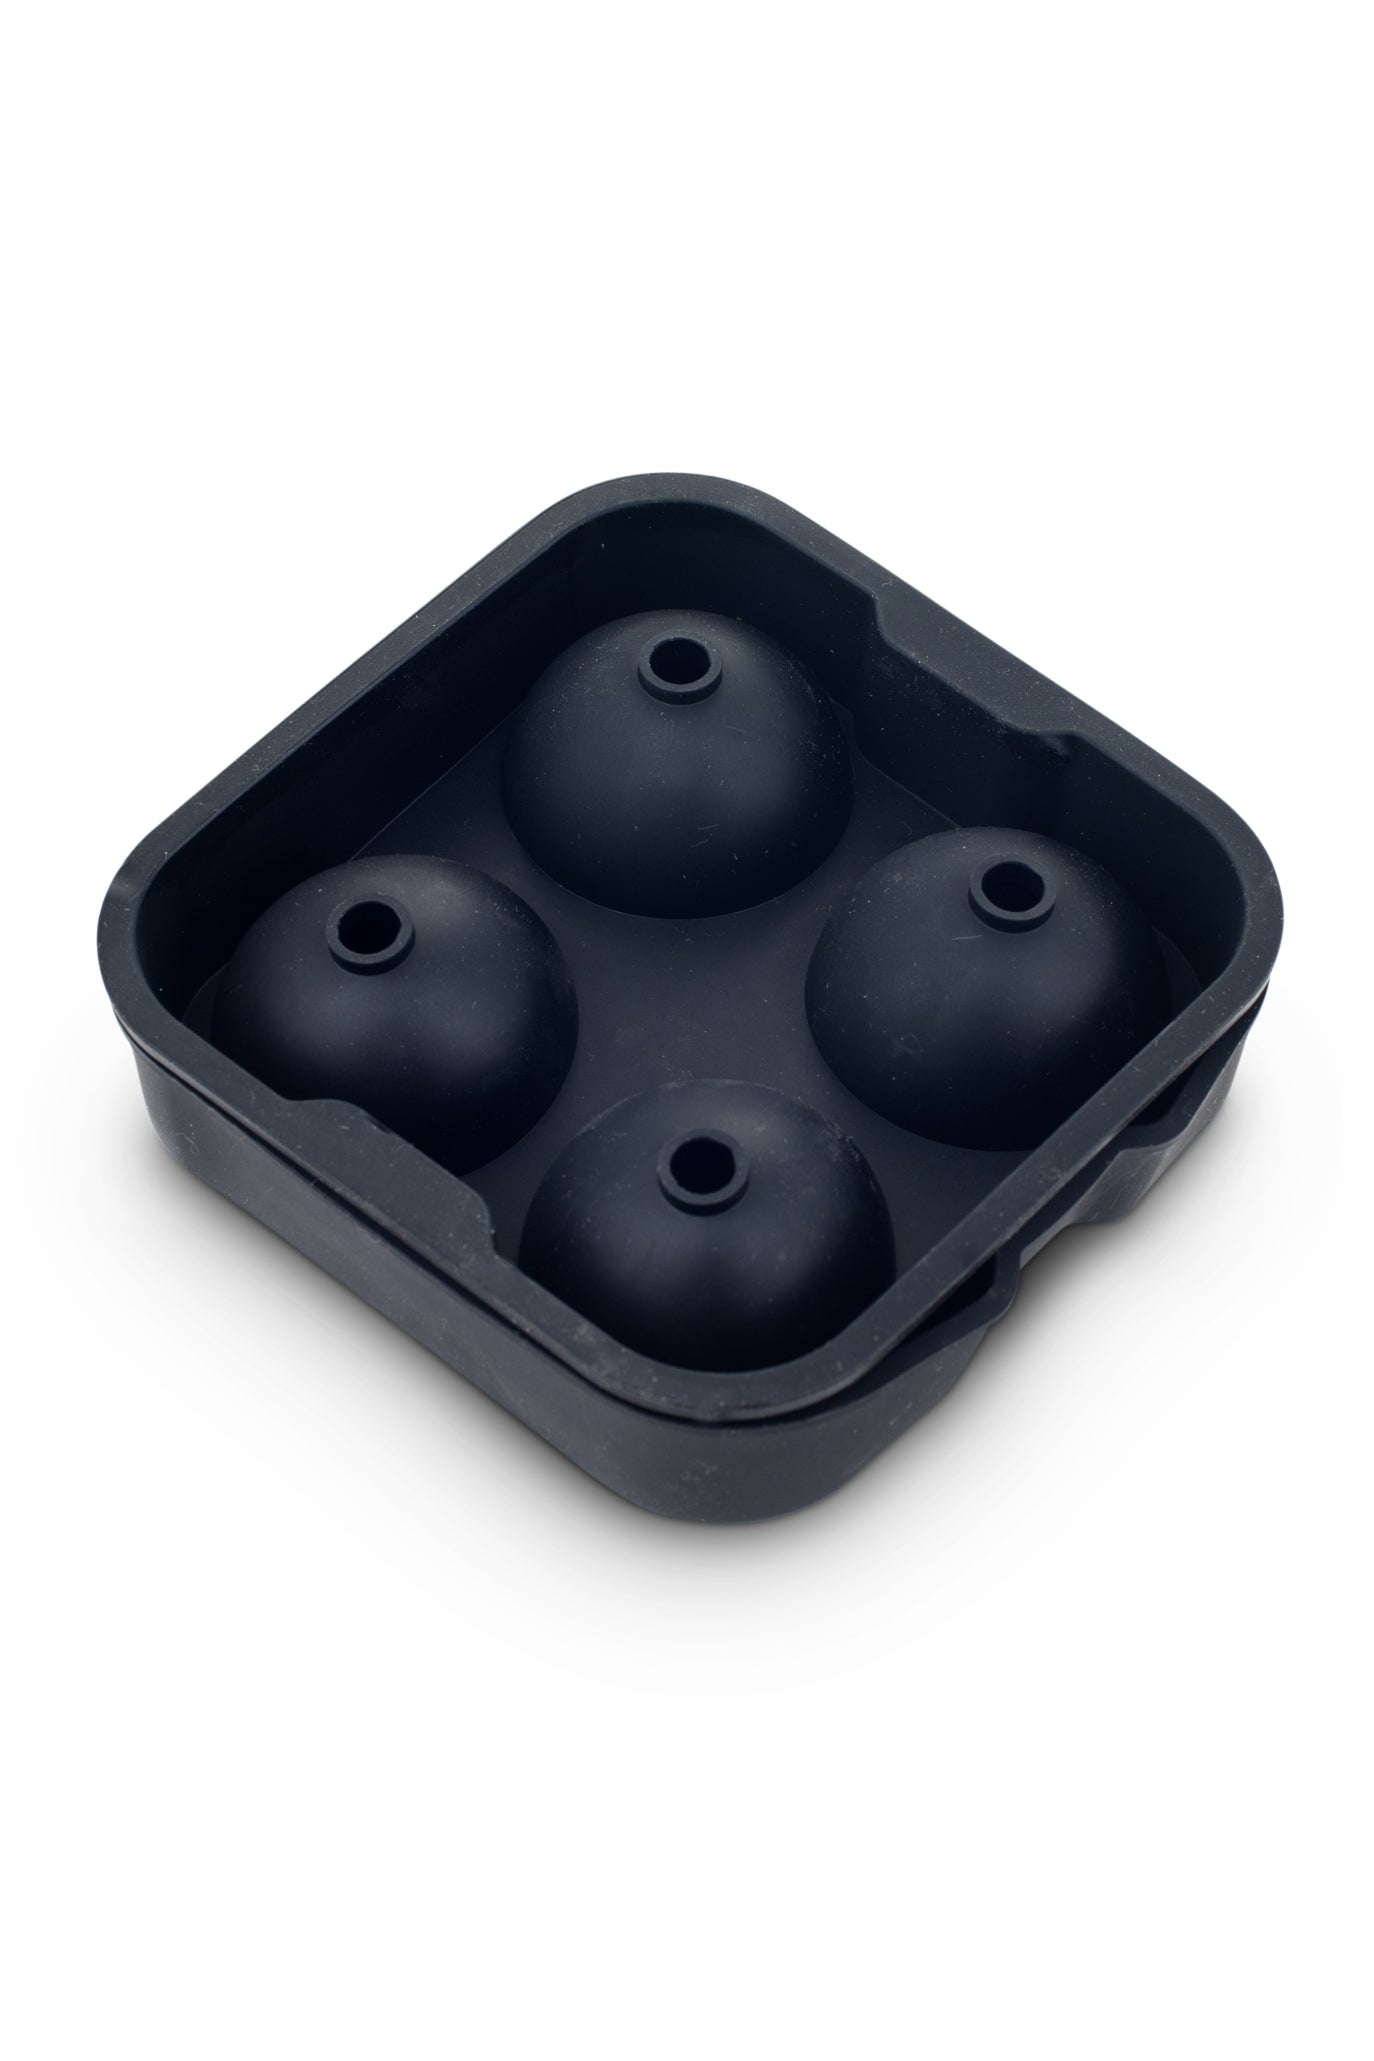 Ice Mould Sphere 4 Section Black